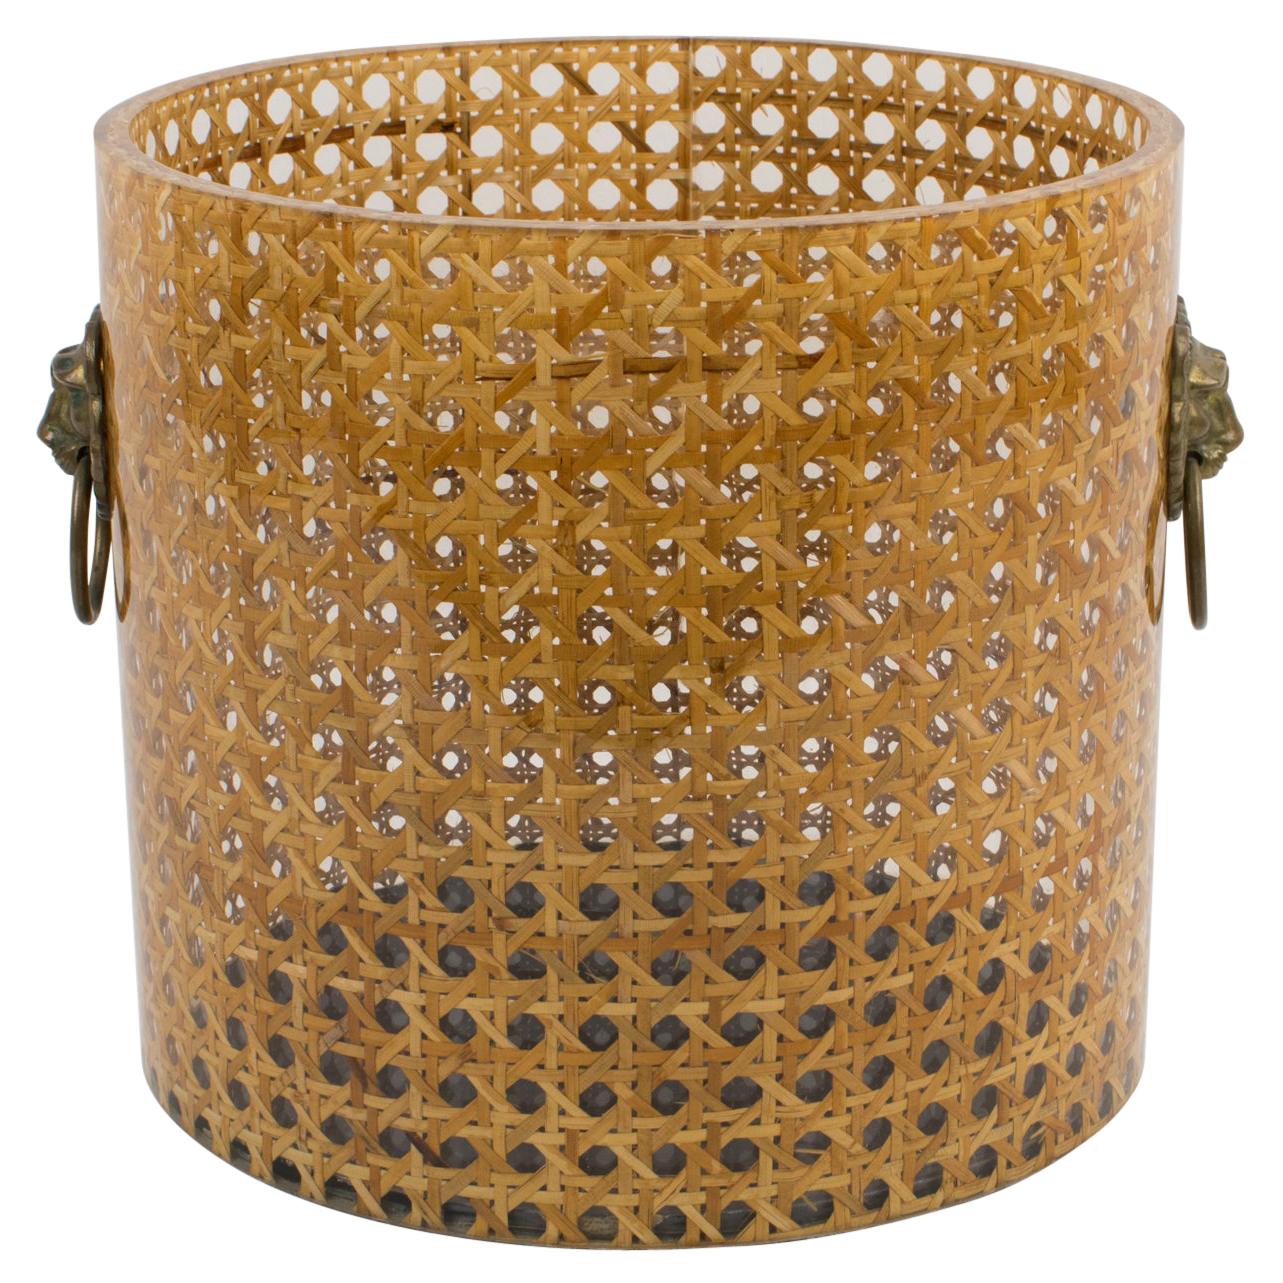 Christian Dior Home Collection 1970s Lucite and Rattan Waste Basket or Planter